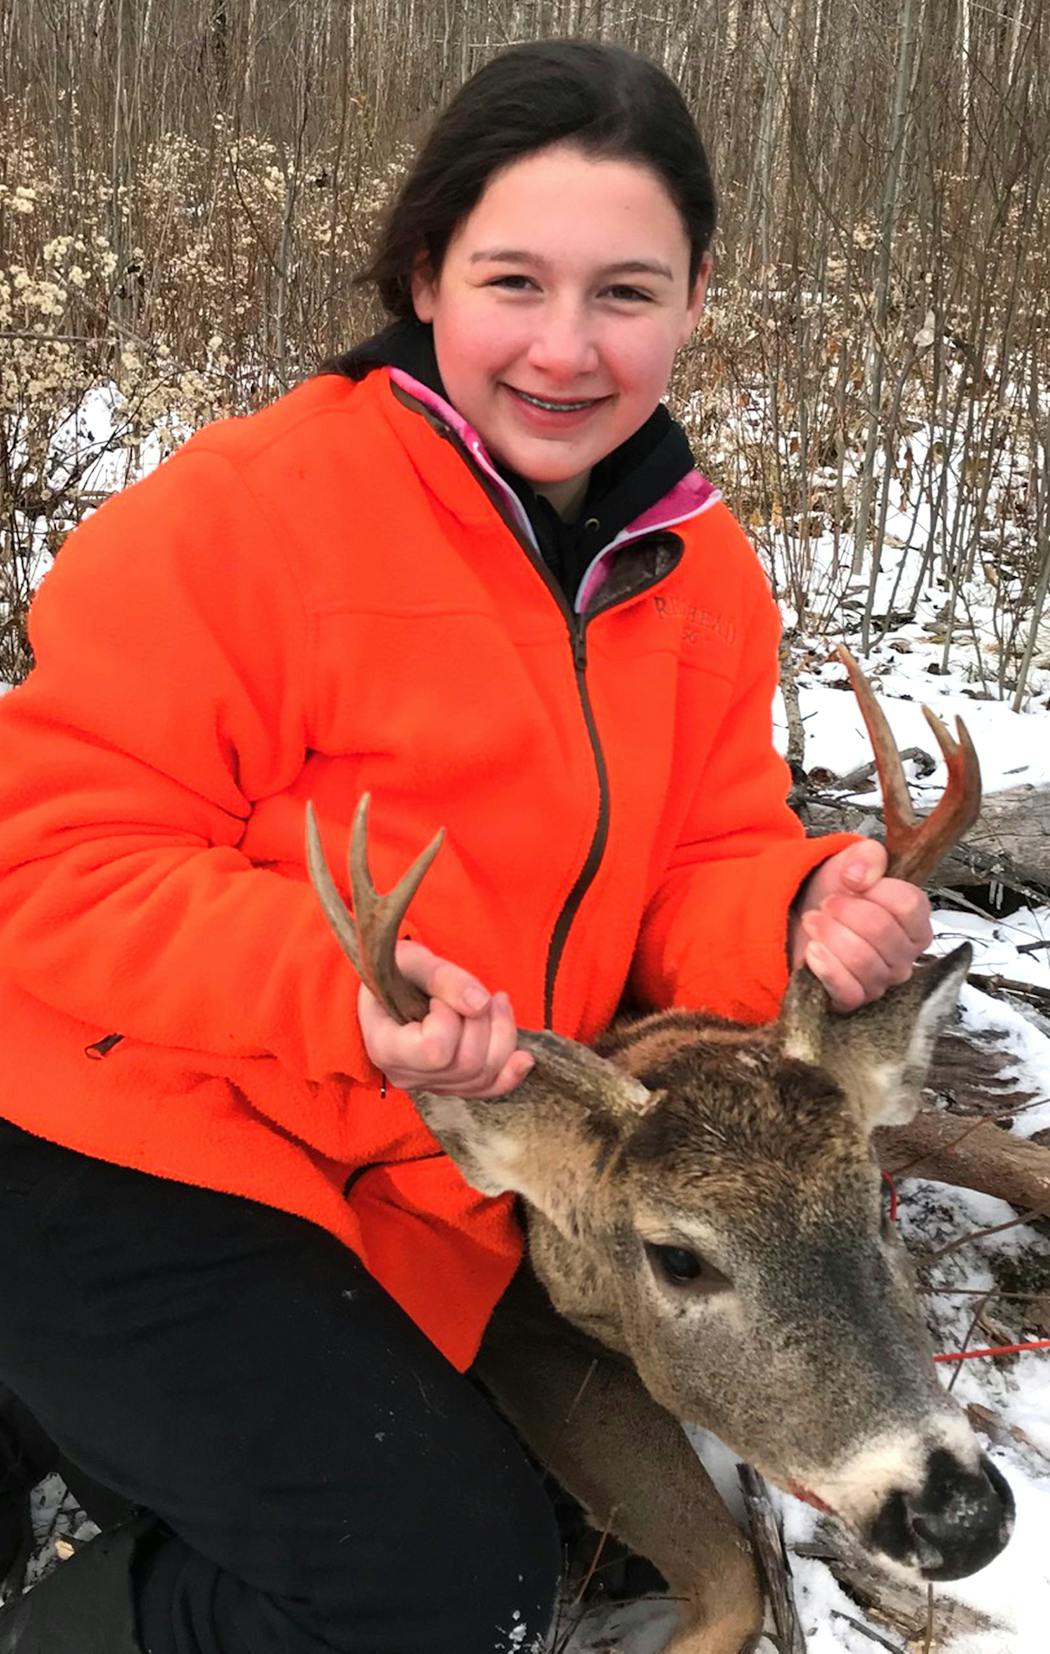 Harper Lien, 13, of Andover, shot her first buck while hunting near Wirt, Minn., on Sunday of opening weekend. Of the 16 hunters in camp, Harper was the only female. Her dad, Kris, reports that Harper made an excellent shot, felling her buck at 148 yards while triggering a .243. “In the 25-year history of our camp, she’s the only female ever to take a deer,’’ Kris said.